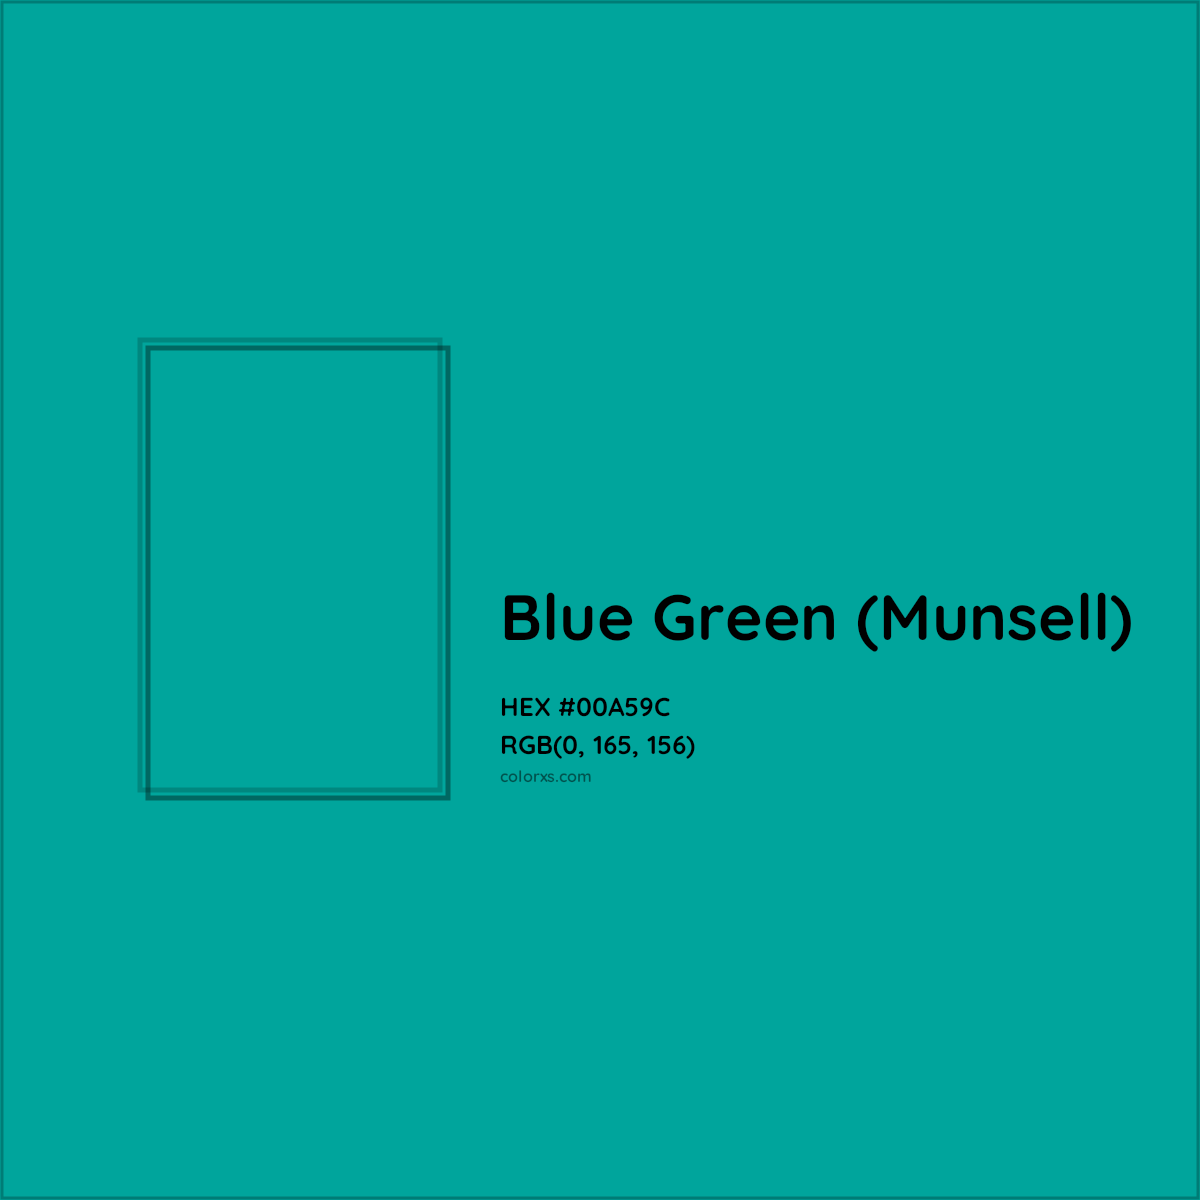 HEX #00A59C Blue Green (Munsell) Color - Color Code